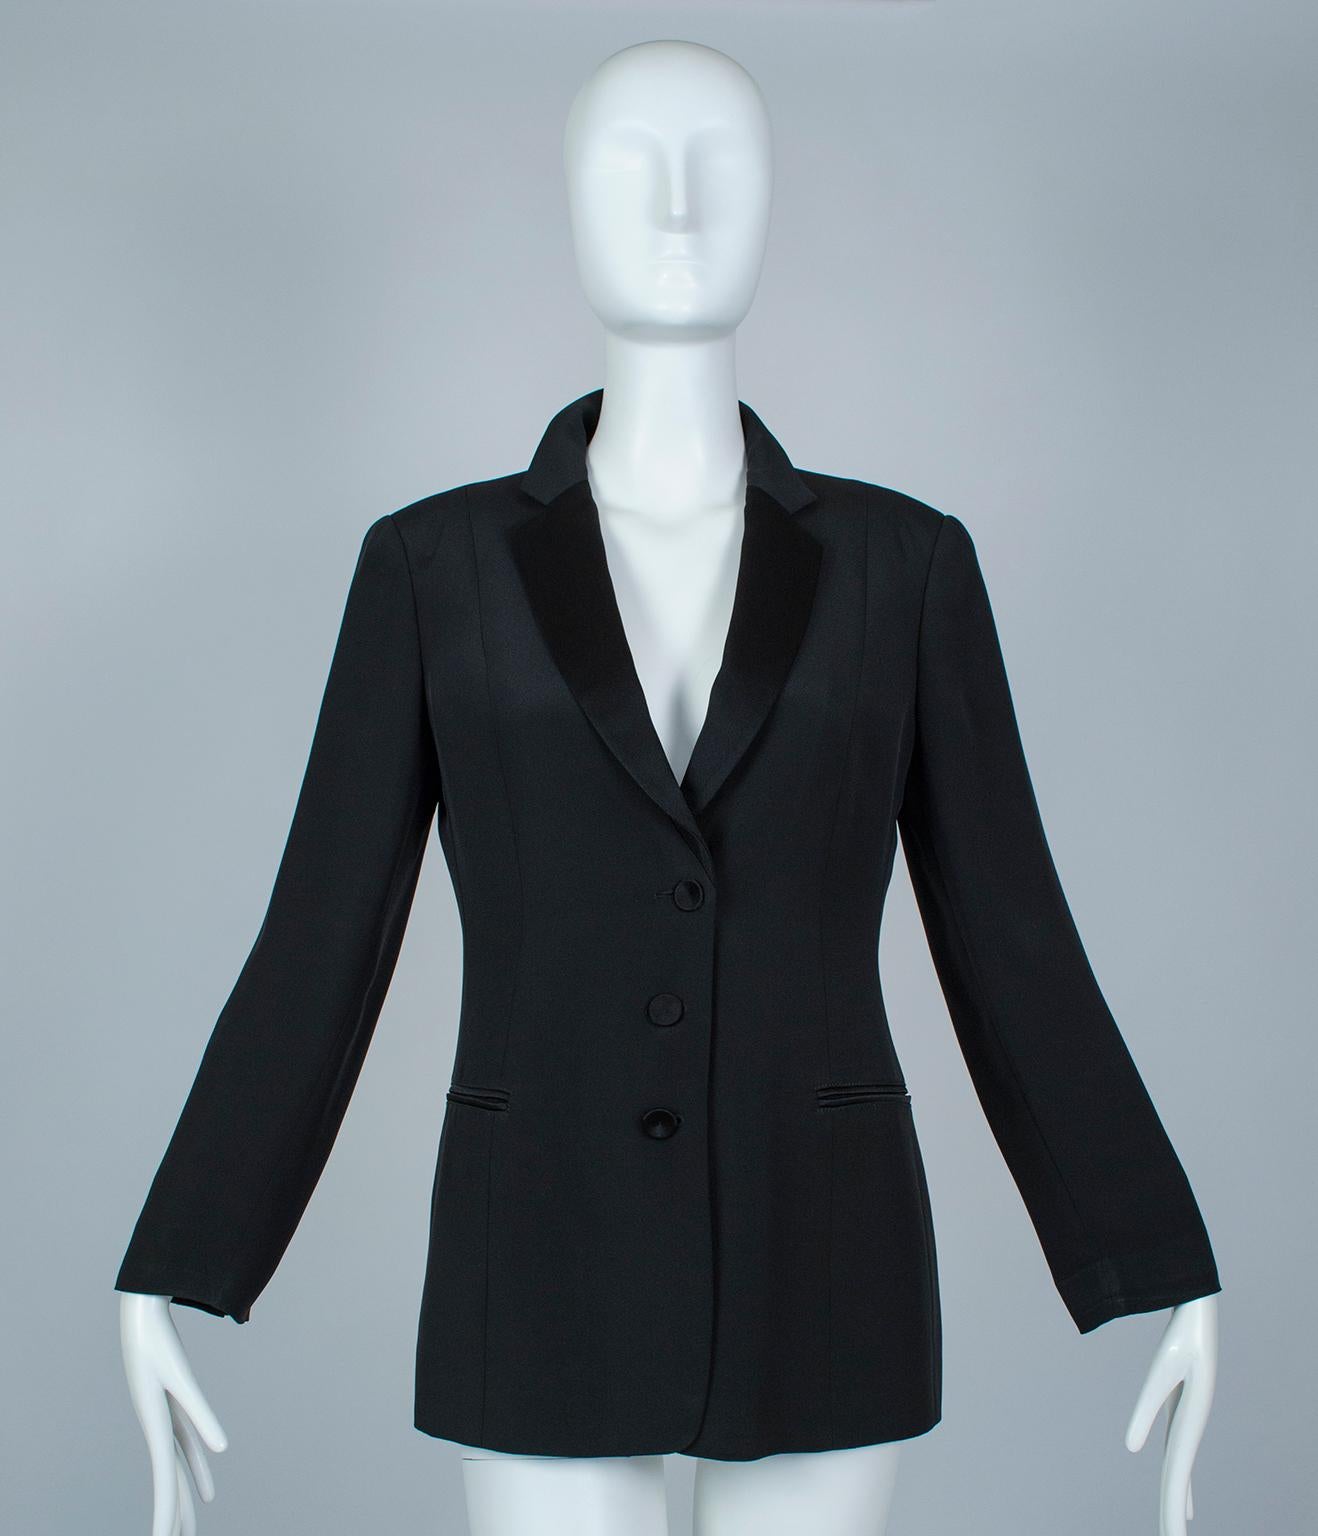 Known for his ladylike but chic designs and masterful fabrics, Giorgio Armani makes a ladies jacket that never disappoints. To wit, his take on the timeless tuxedo jacket incorporates more curves than the St Laurent paradigm, so it remains elegantly